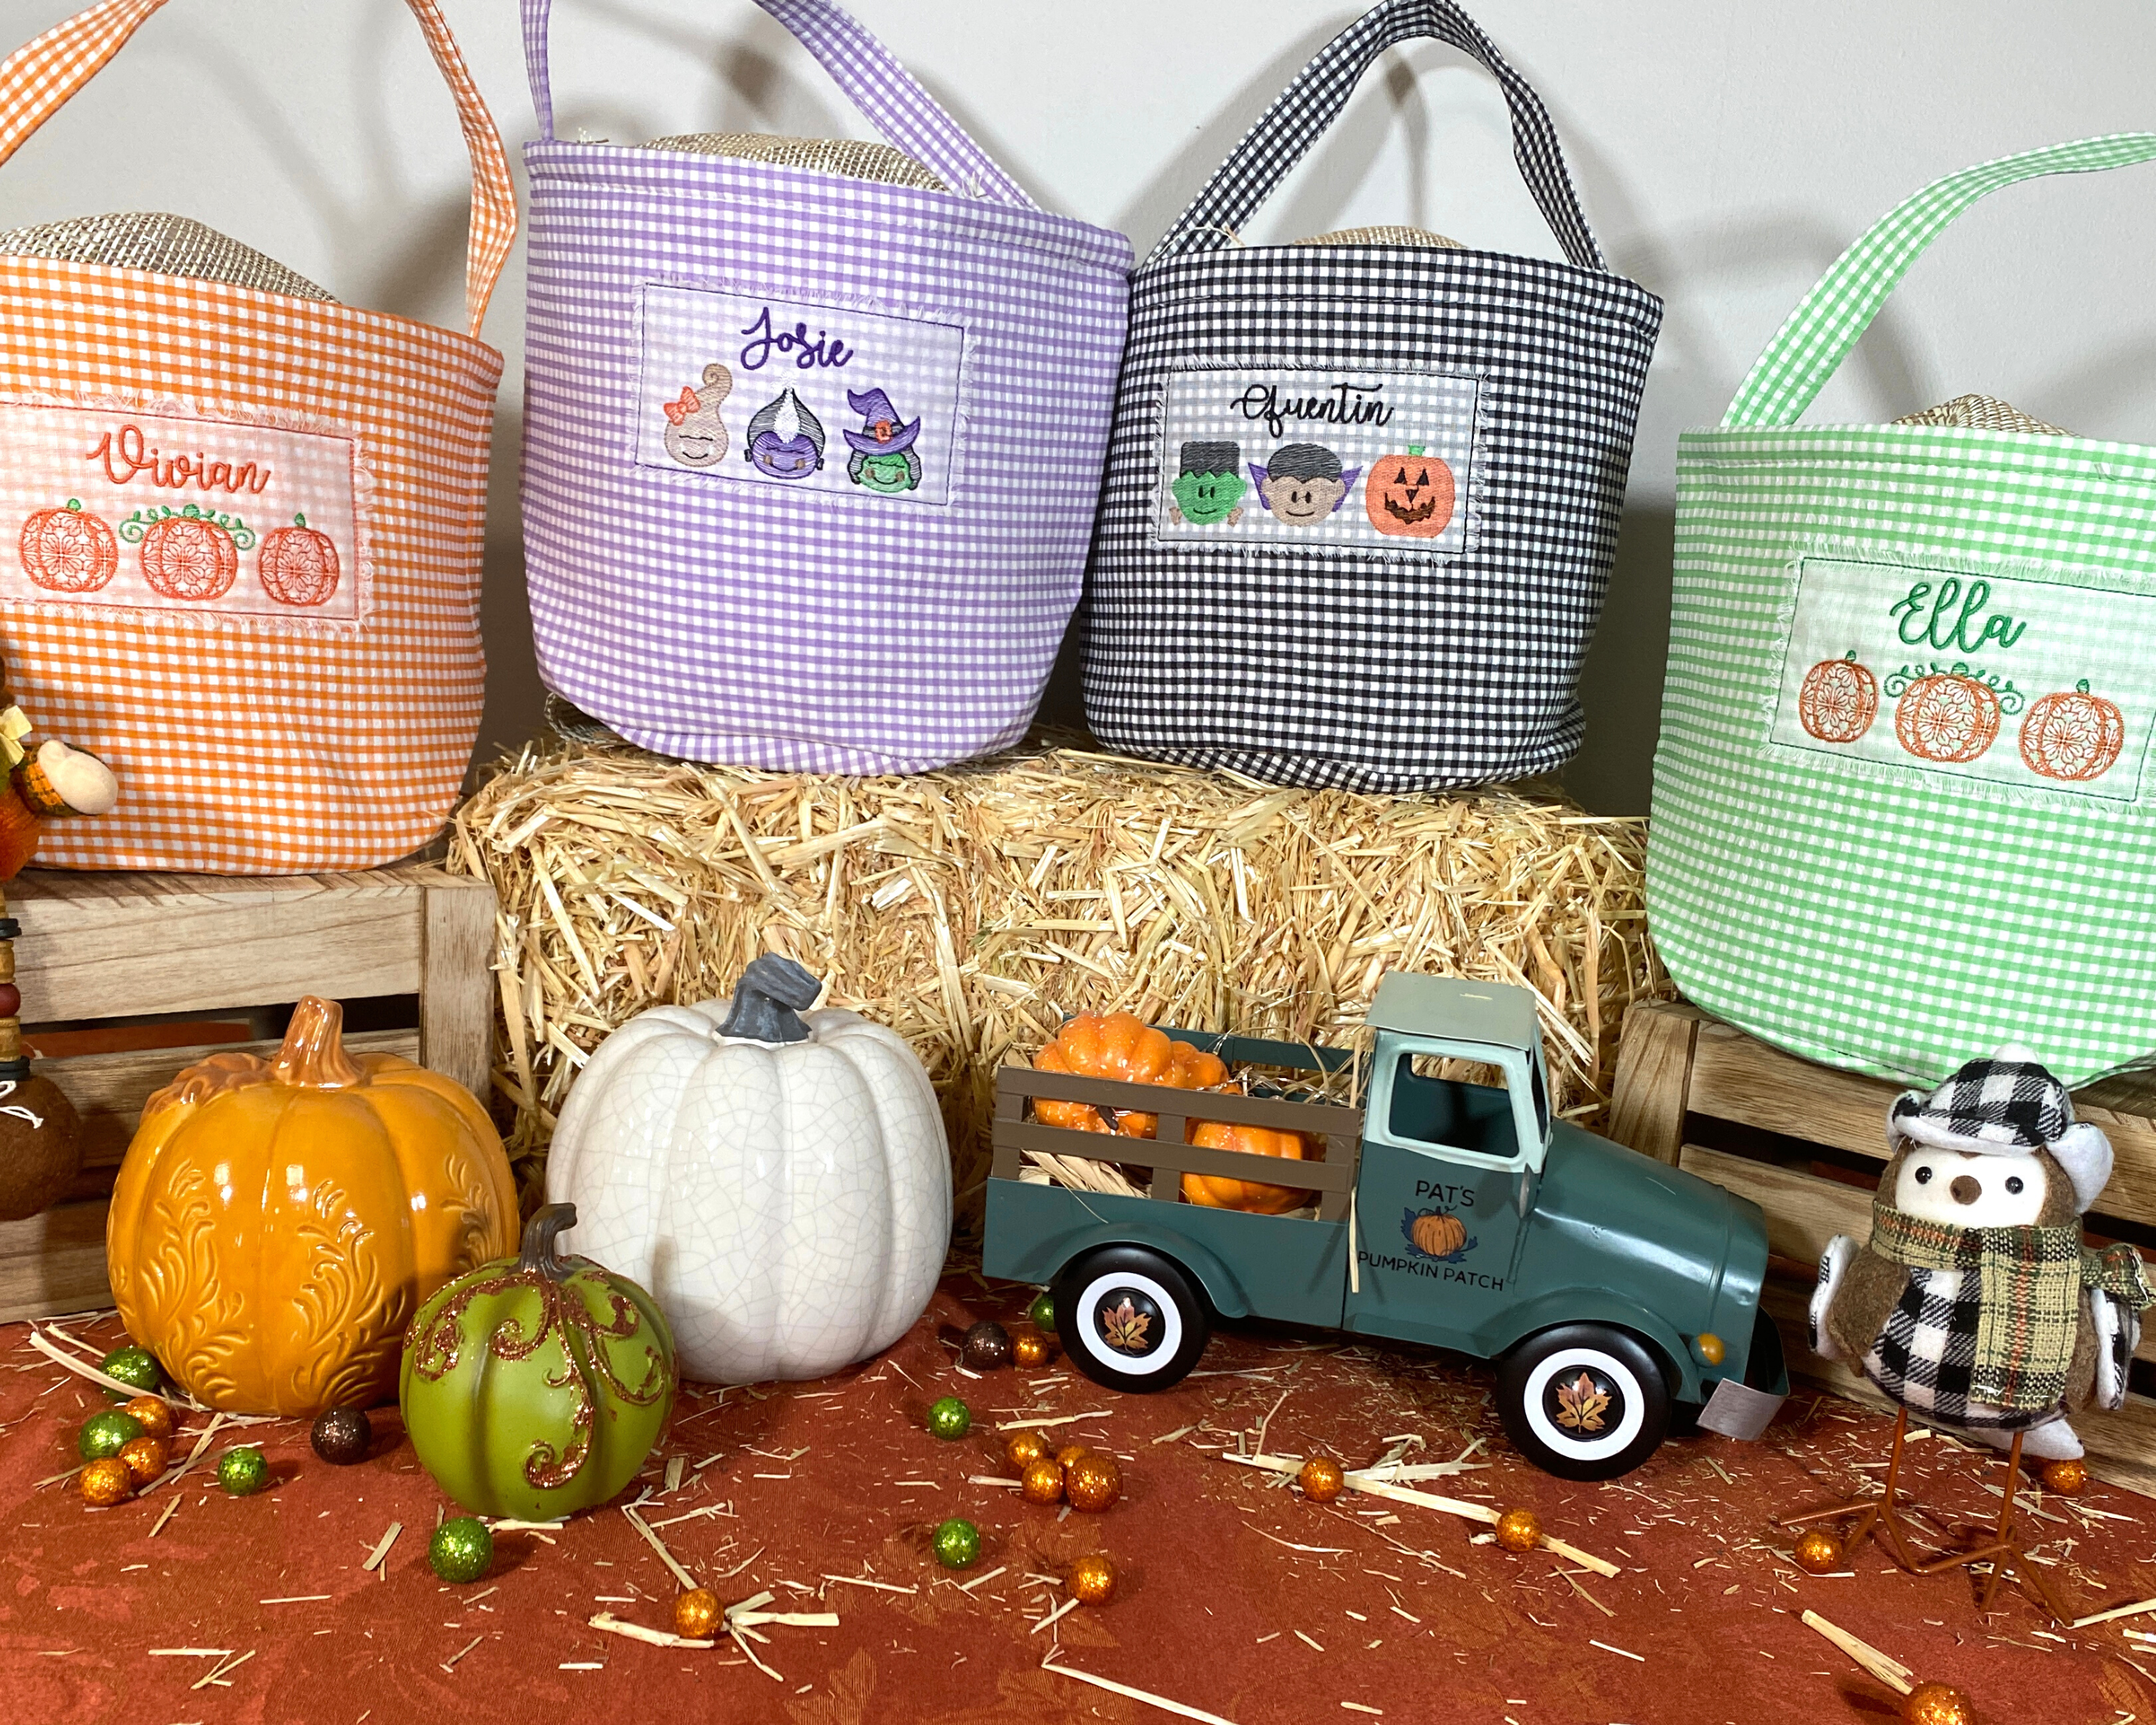 Halloween Basket Bucket Embroidery Blanks with Large Dot Design